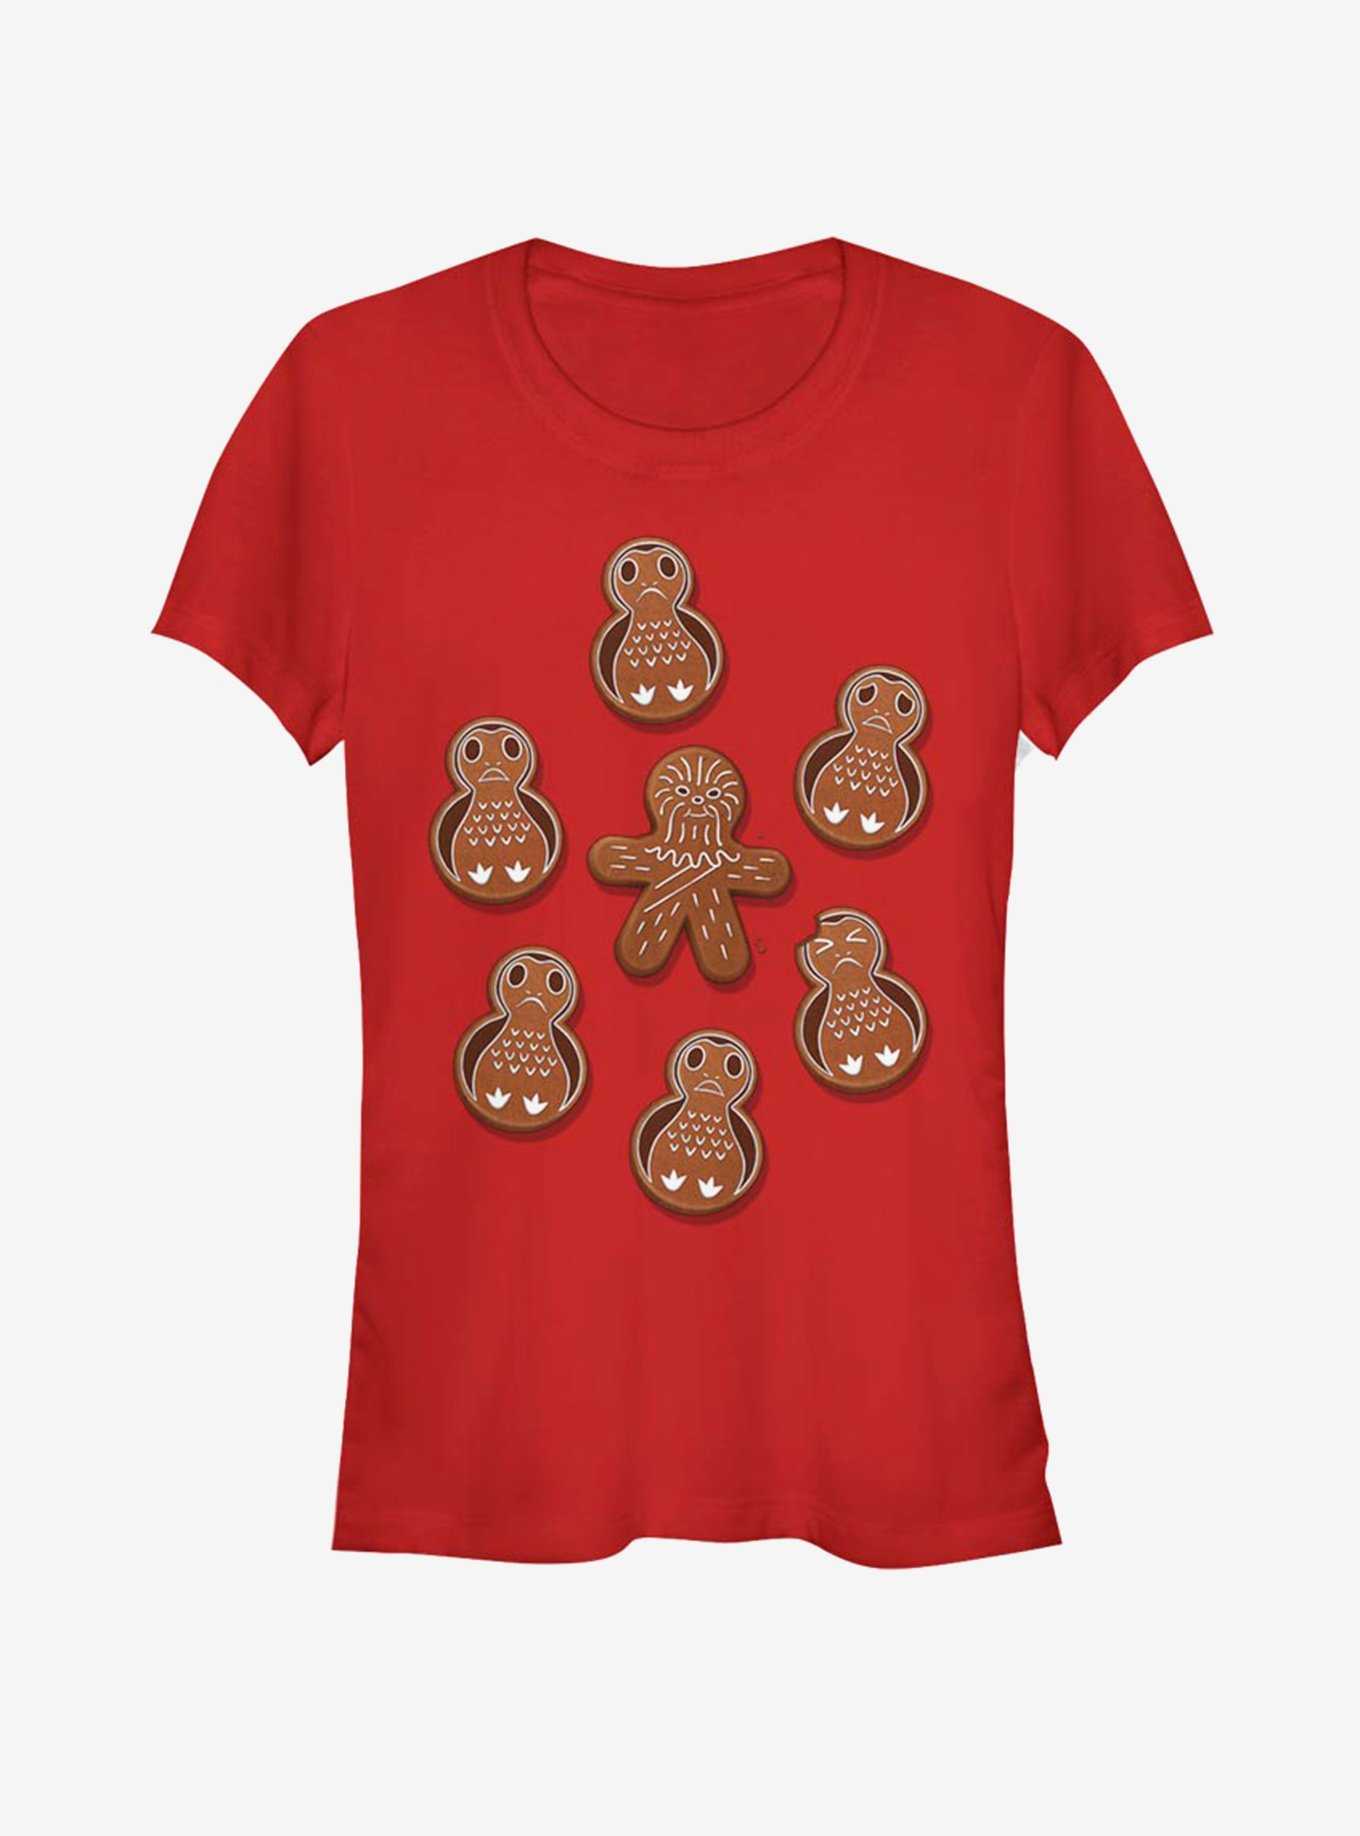 Star Wars Porg Chewie Holiday Cookies Girls T-Shirt, , hi-res